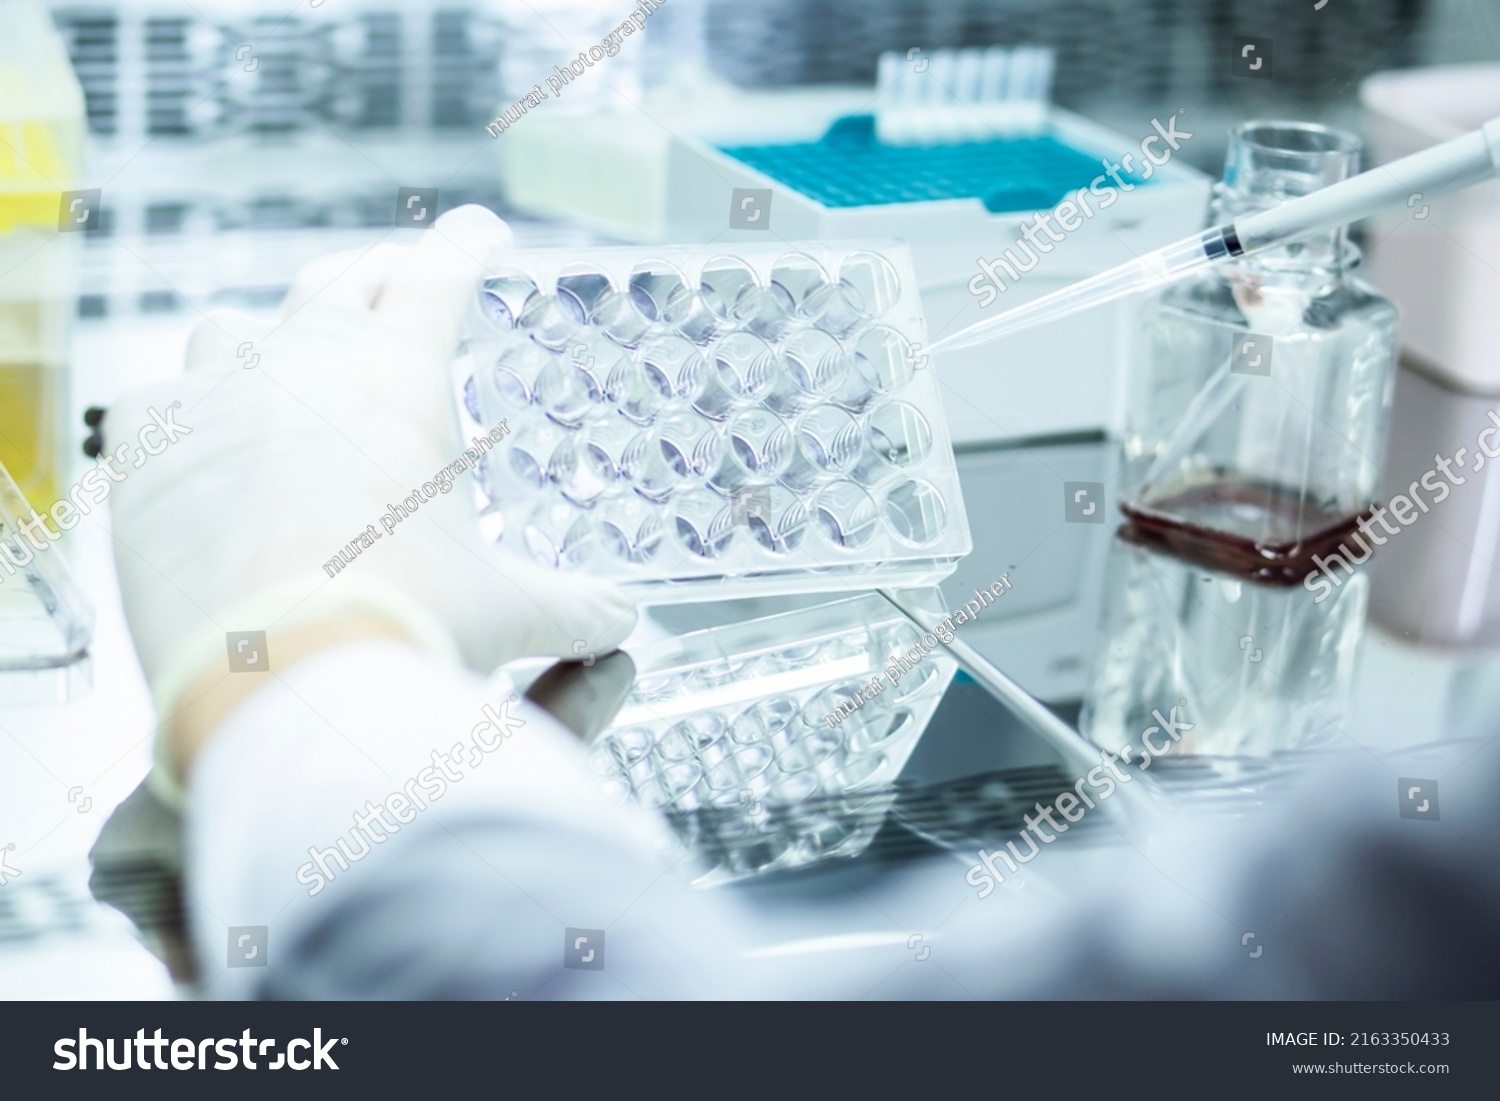 biology medicine and medical laboratory photo and cell culturing multi well plate and pipette safety cabinet #2163350433